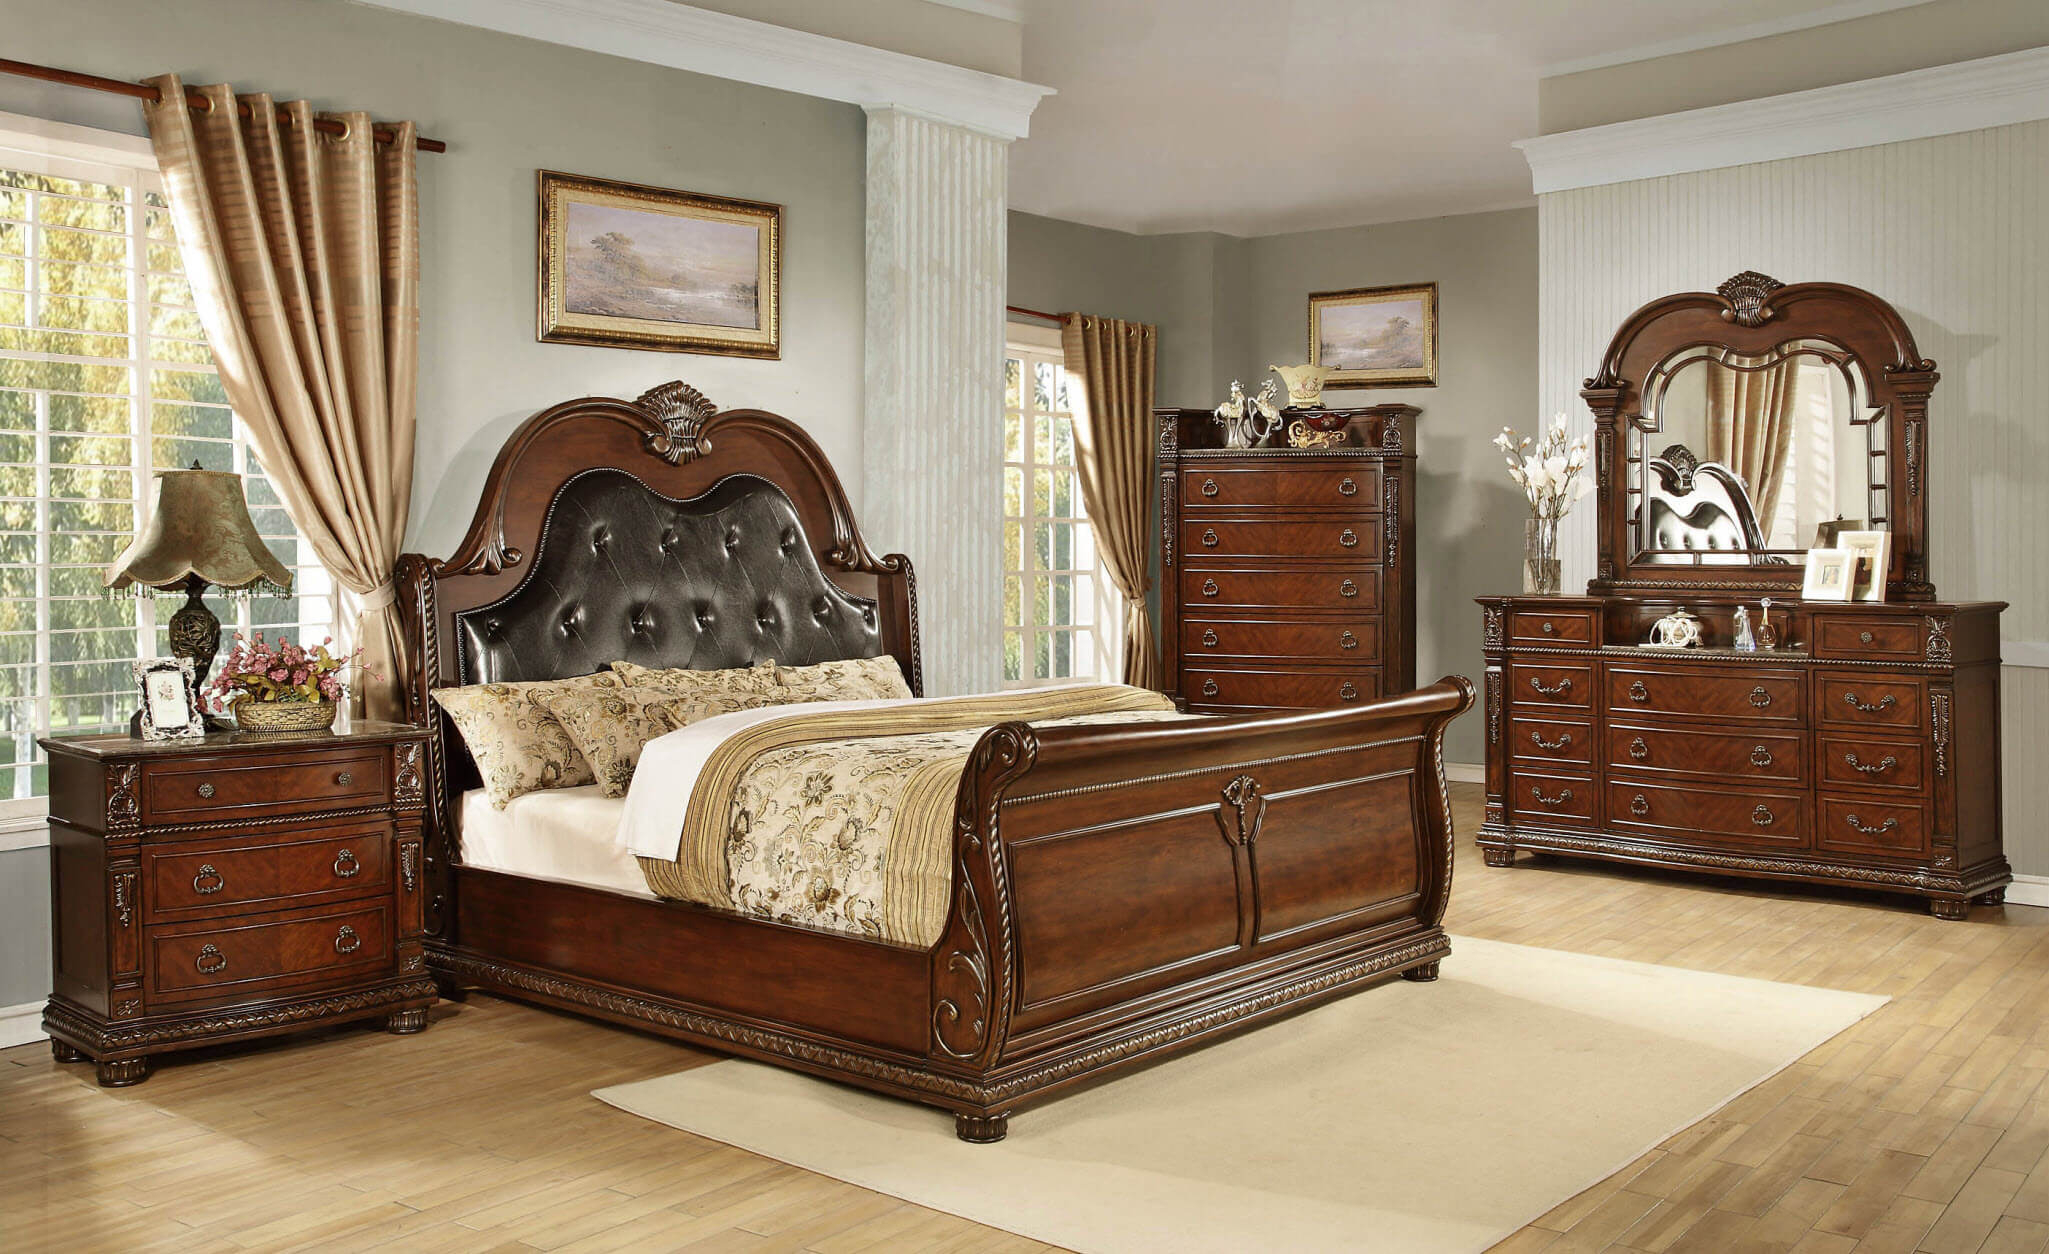 B718 Palace Marble Top Bedroom Set Global Trading with size 2049 X 1254